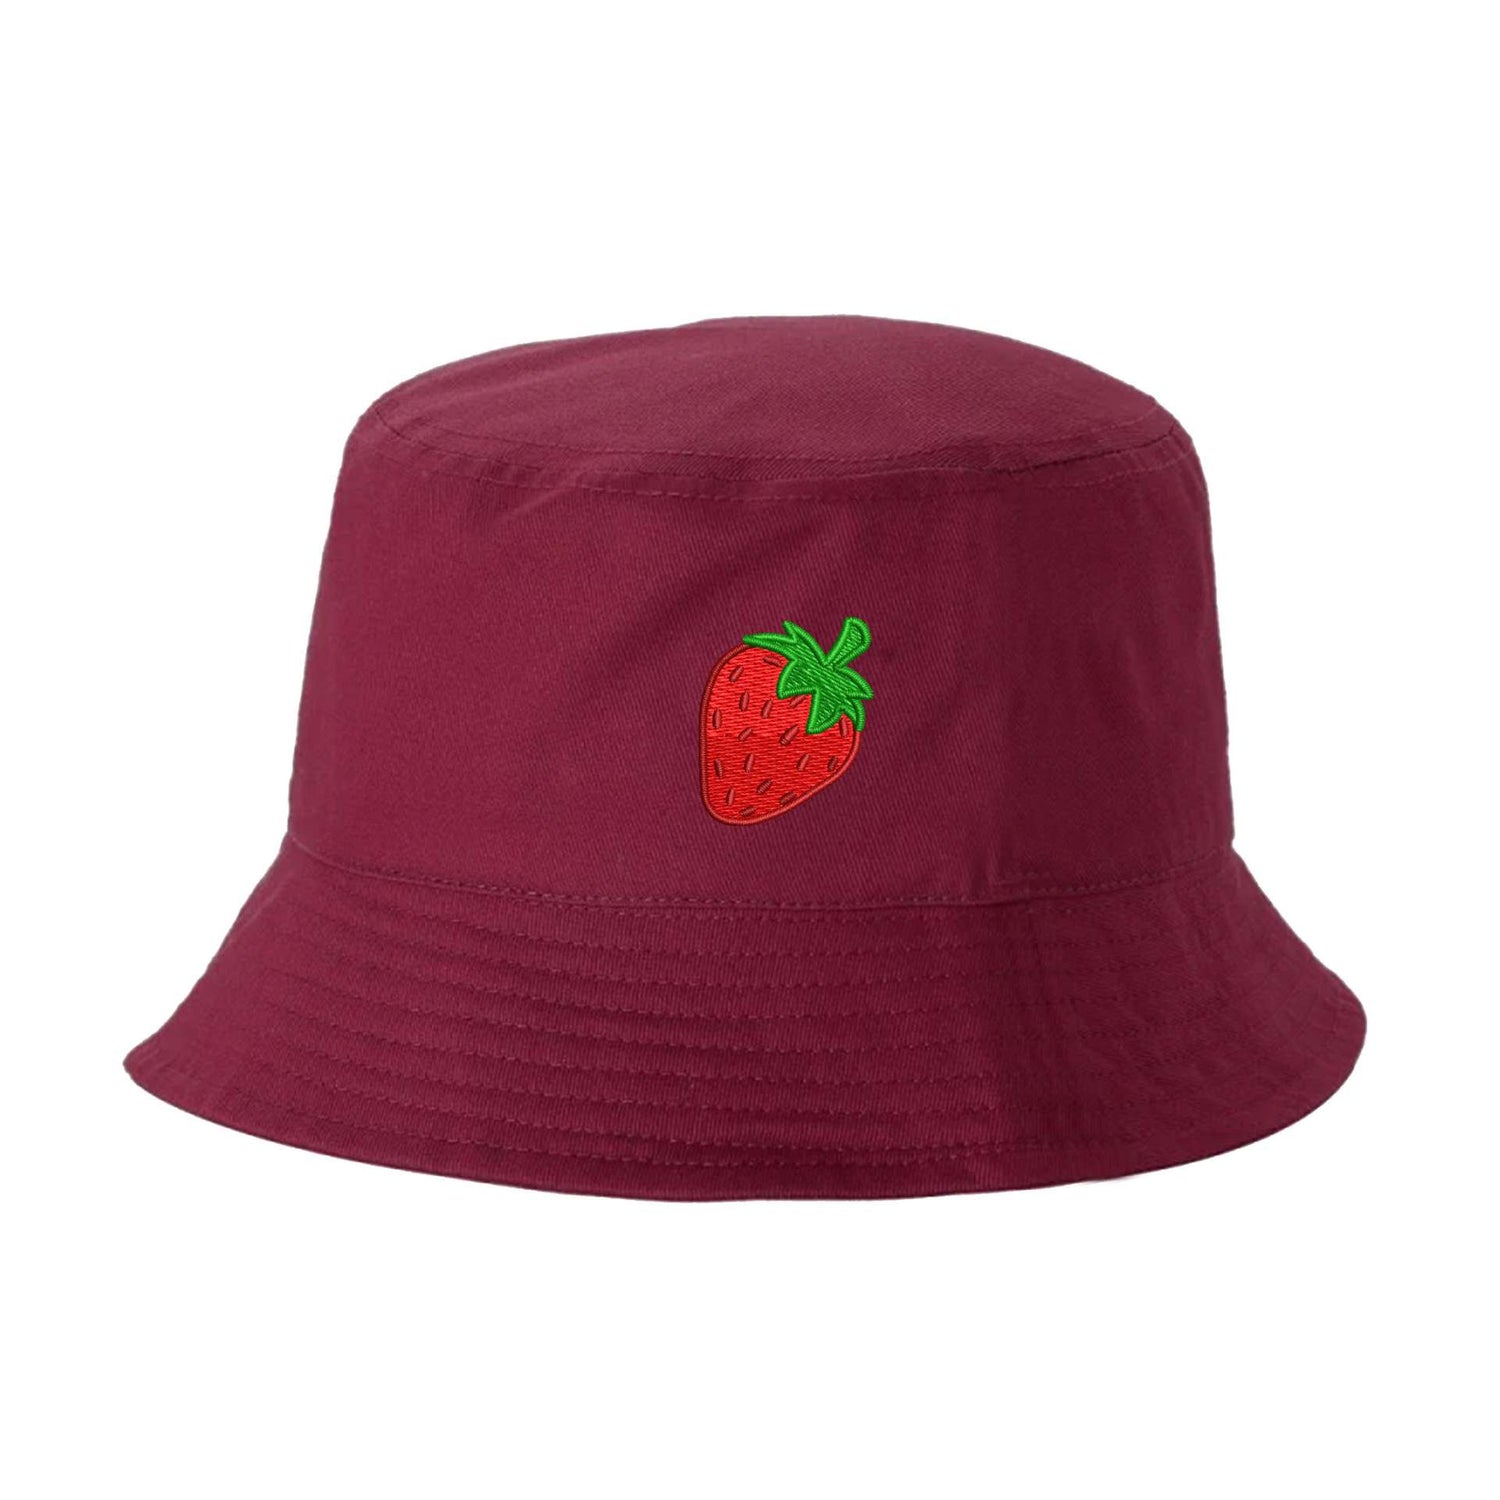 Burgundy Bucket Hat embroidered with a strawberry - DSY Lifestyle